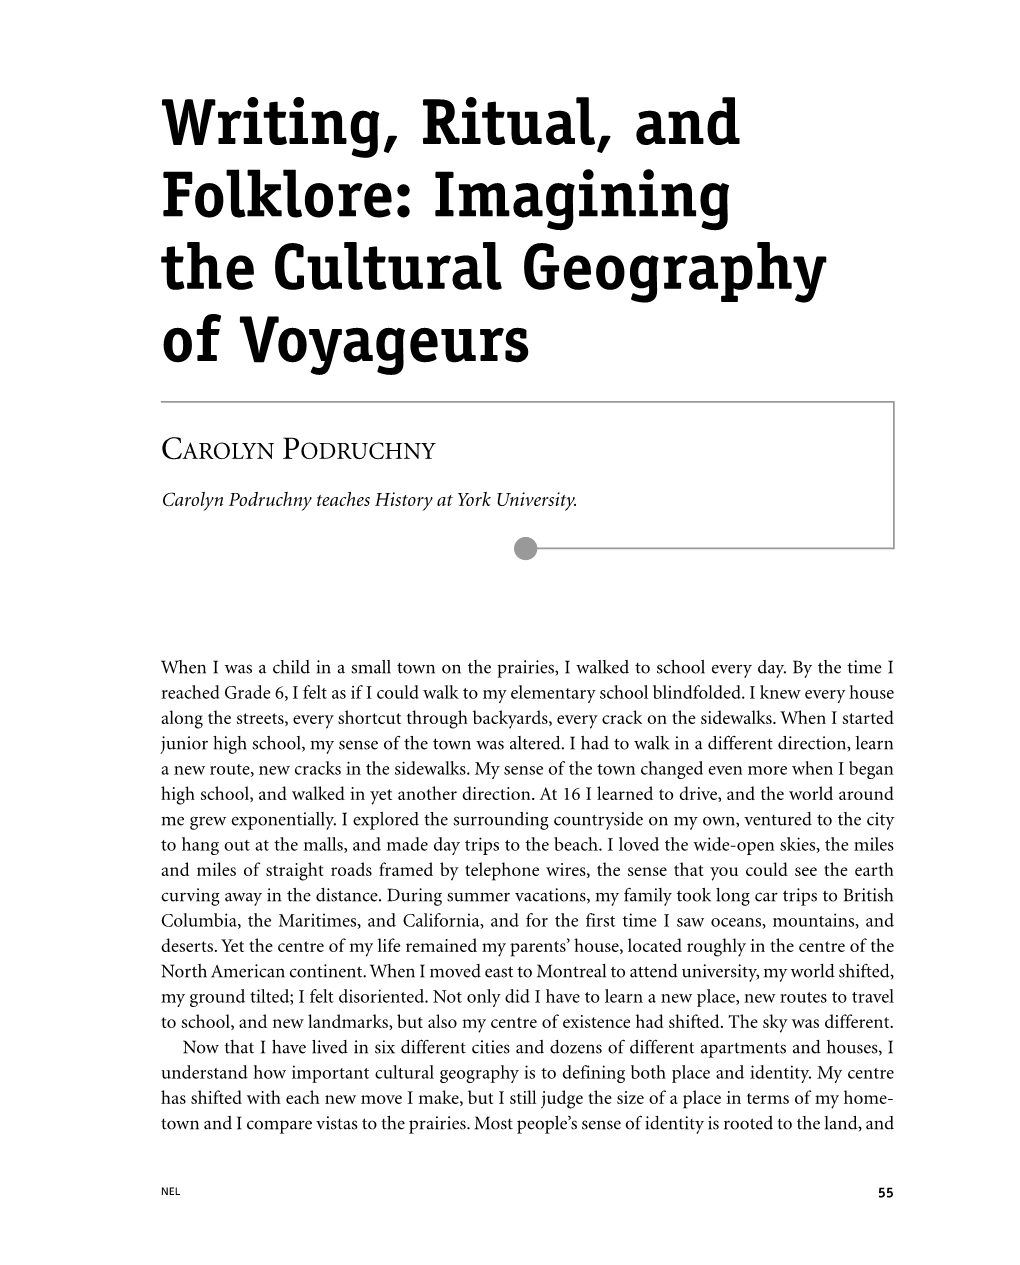 Imagining the Cultural Geography of Voyageurs